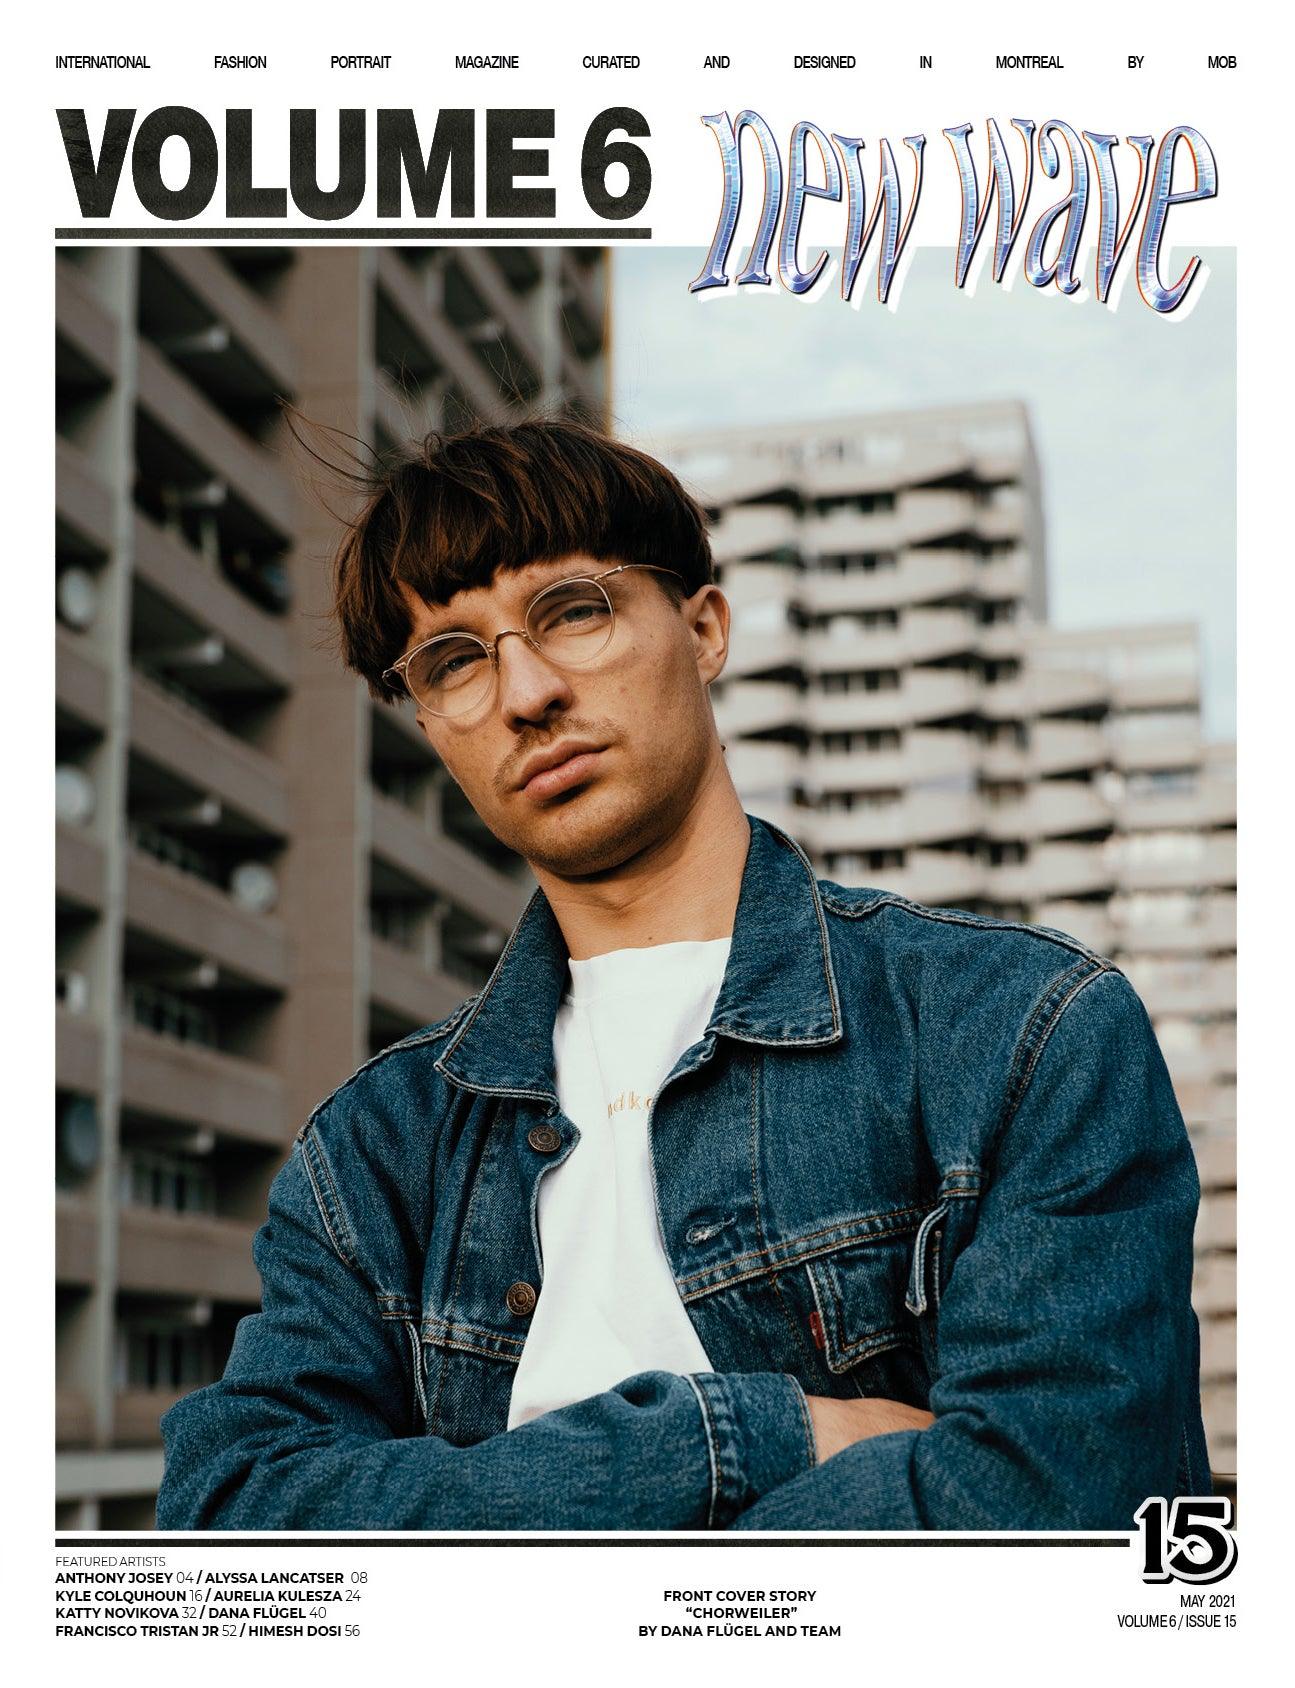 NEW WAVE | VOLUME SIX | ISSUE #15 - Mob Journal